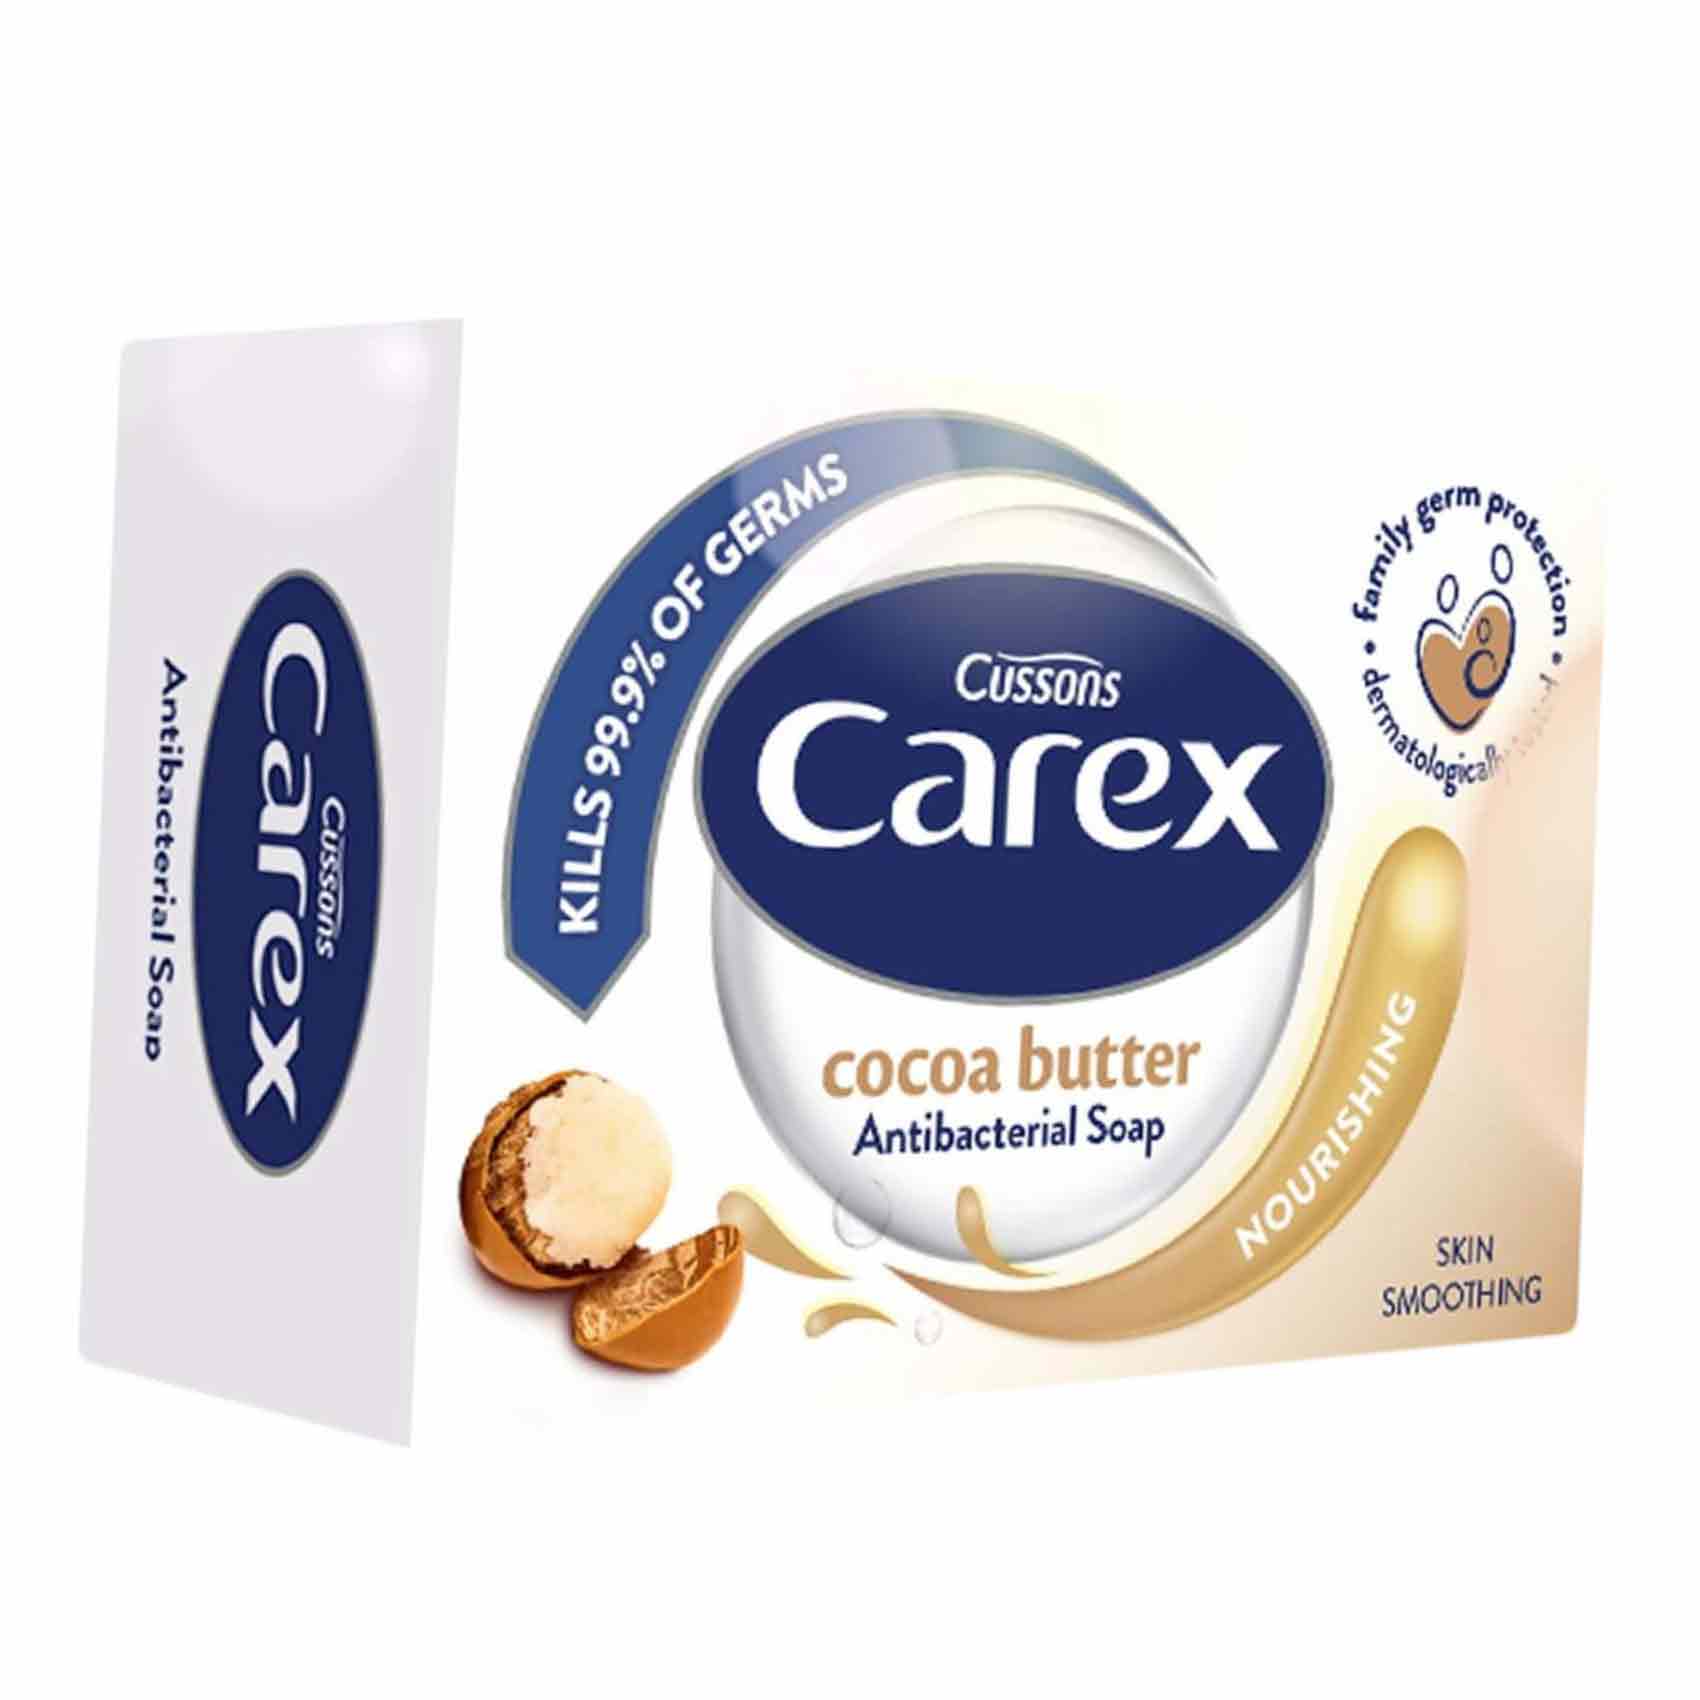 Cussons Carex Cocoa Butter Antibacterial Soap 175g